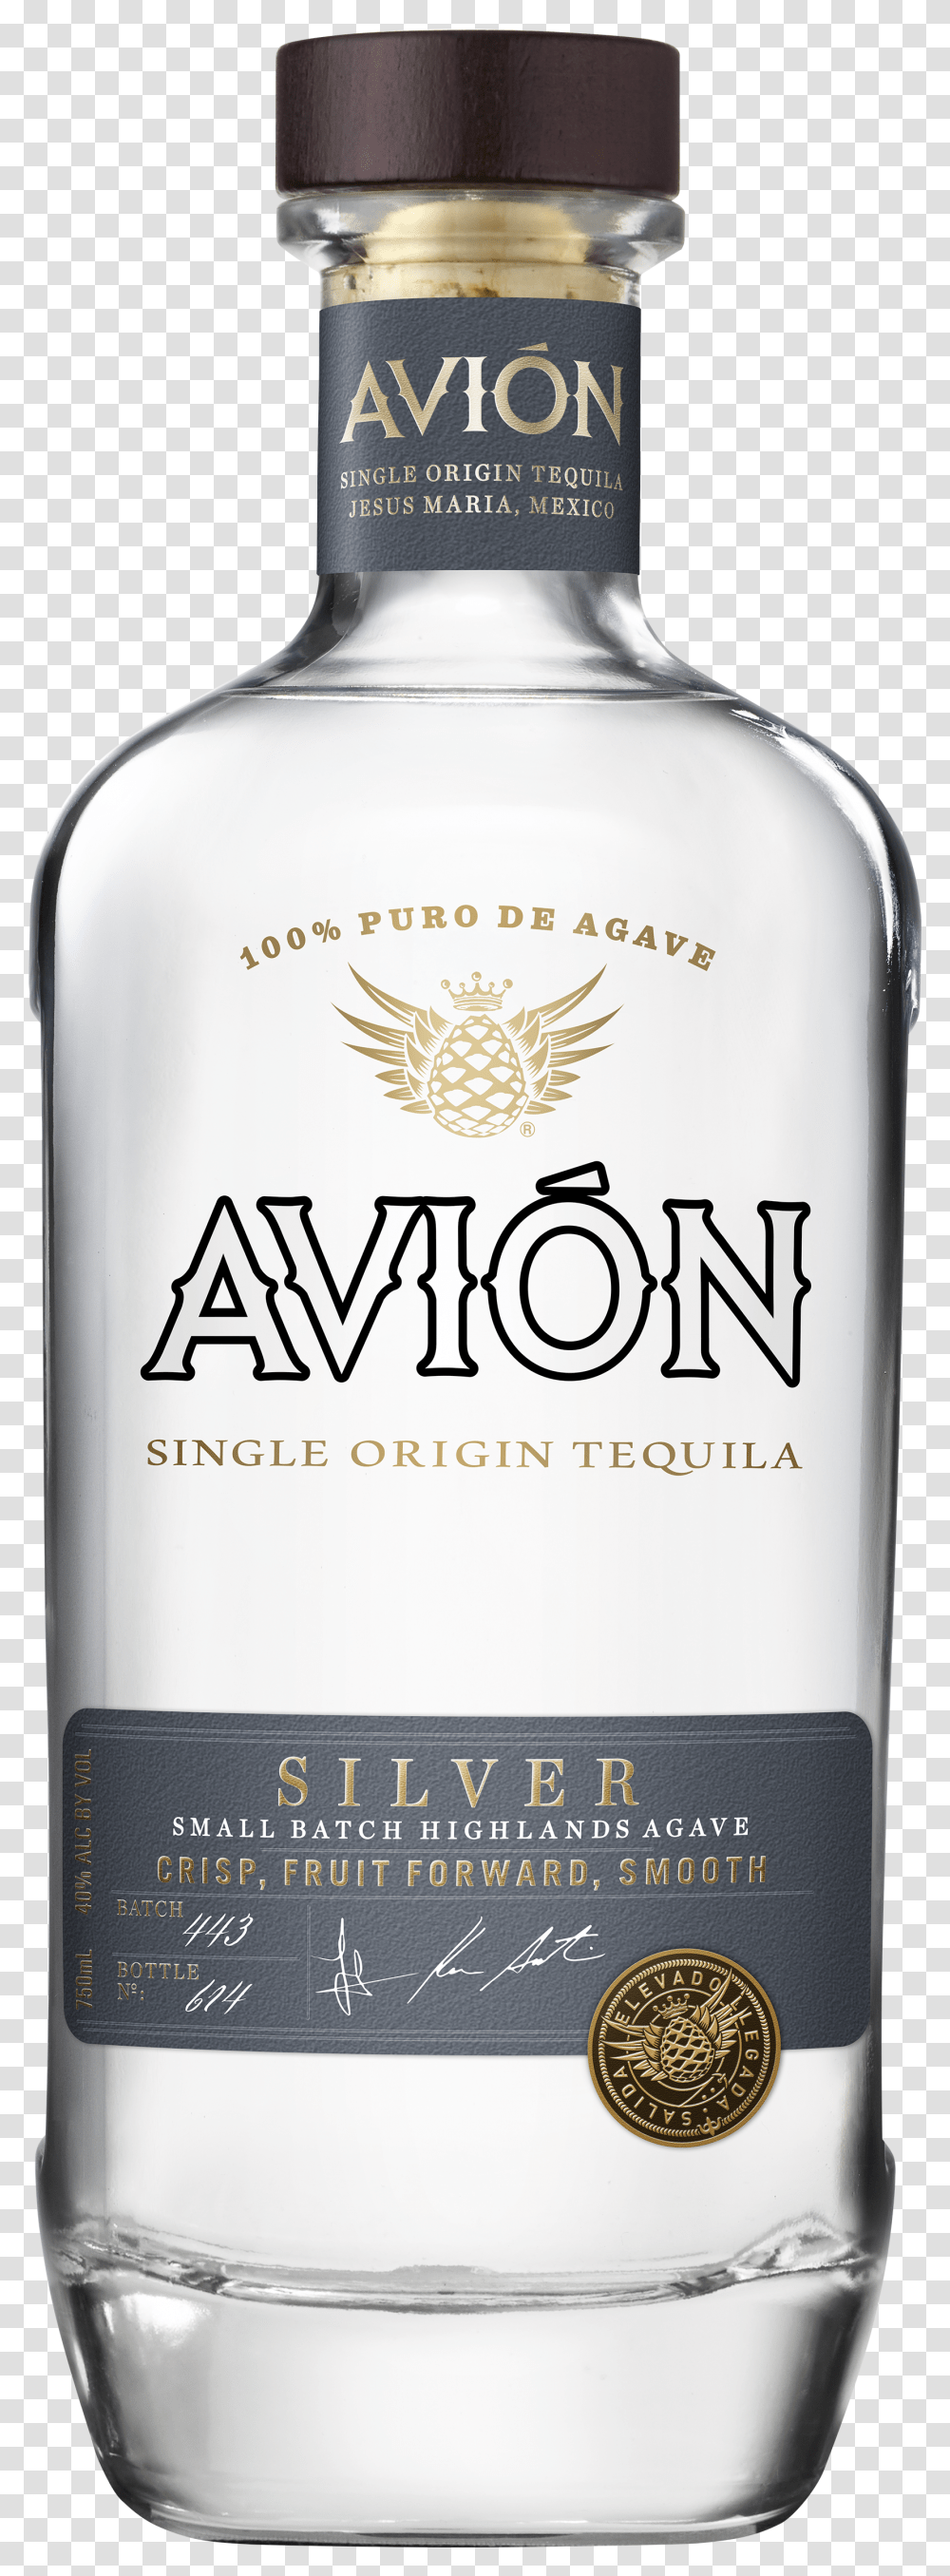 Avion Tequila Mexico Silver 750ml Bottle Avion Silver Tequila Transparent Png